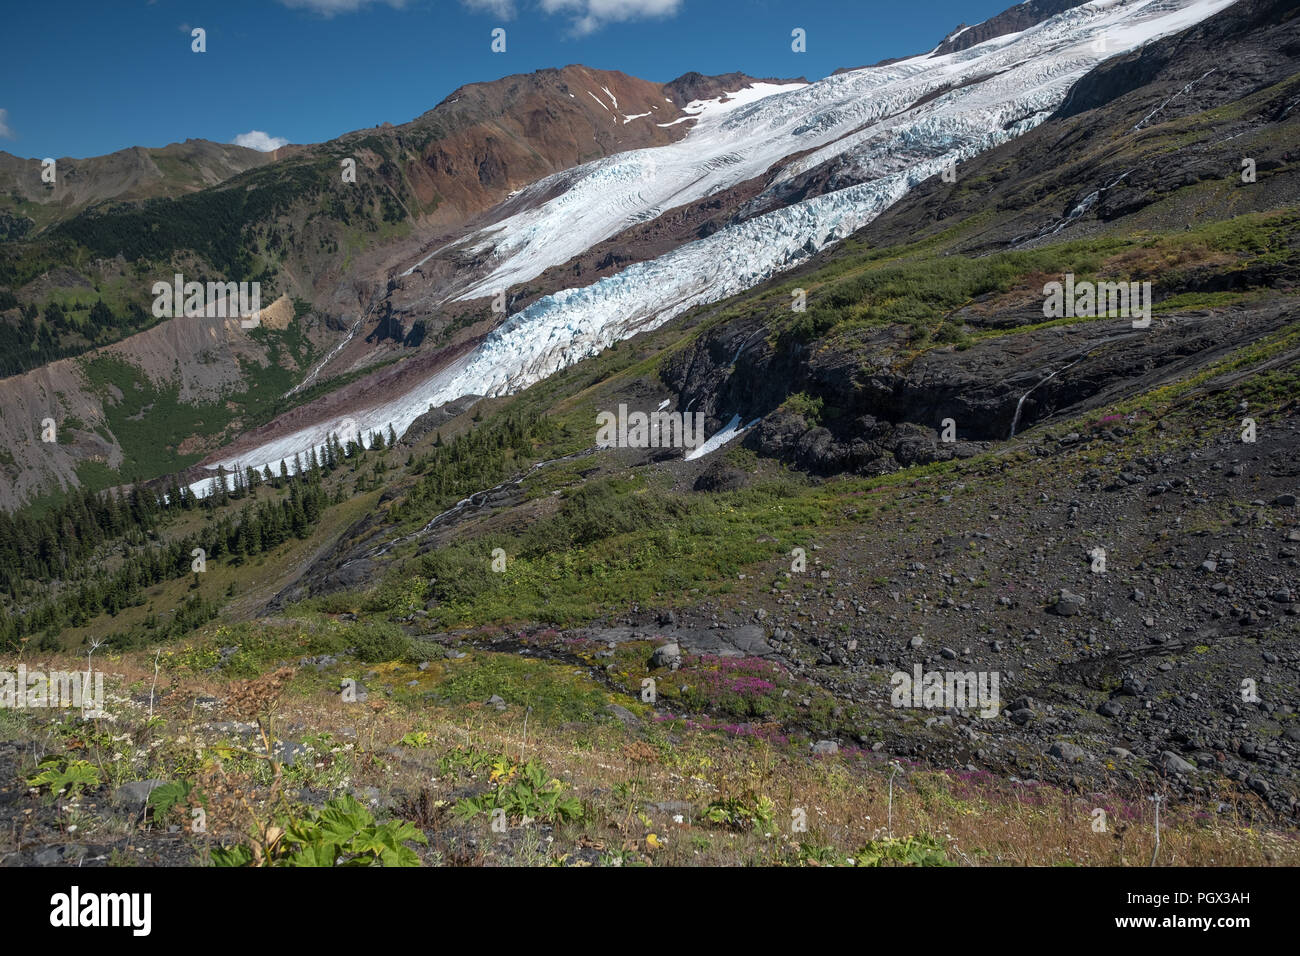 Small creek in foreground provides good terrain for a splash of colorful Fireweed and other alpine flowers growing on Mount Baker's western face.  Nea Stock Photo